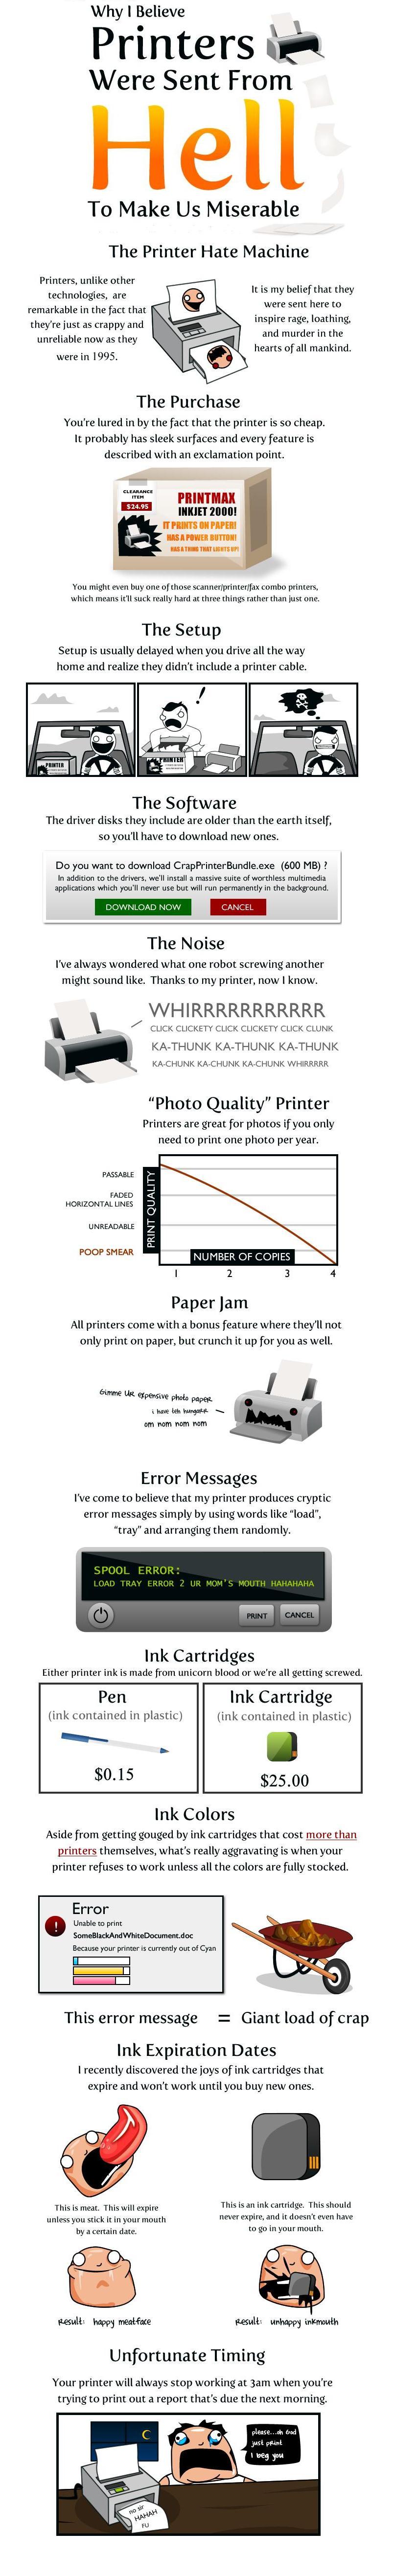 printers_are_from_hell.jpg